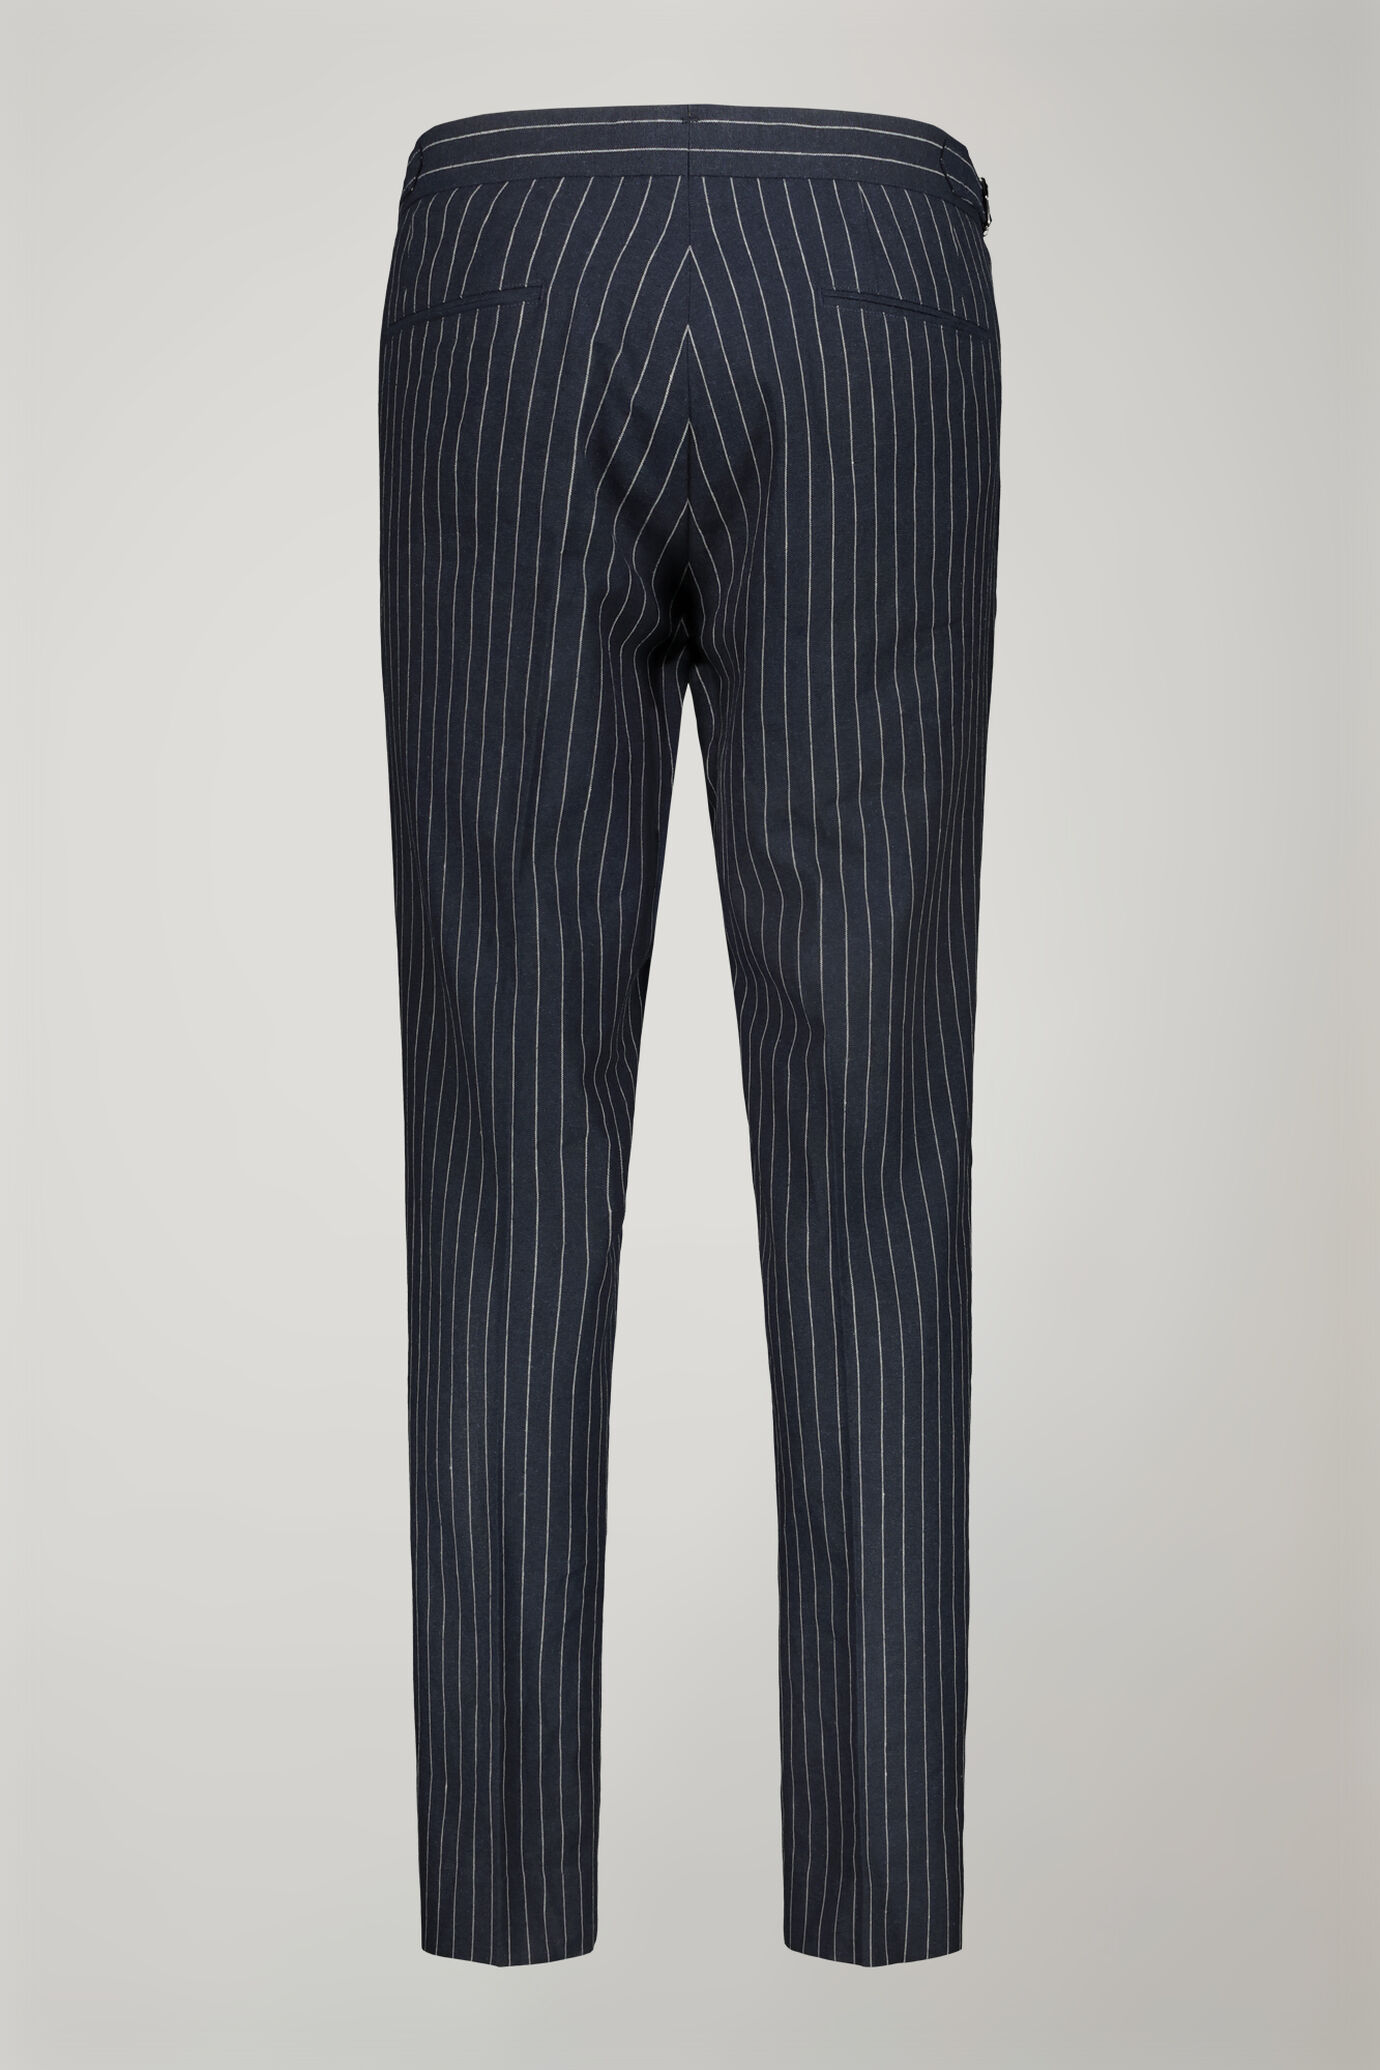 Men's classic double pinces trousers linen and cotton fabric with regular fit pinstripe design image number 6